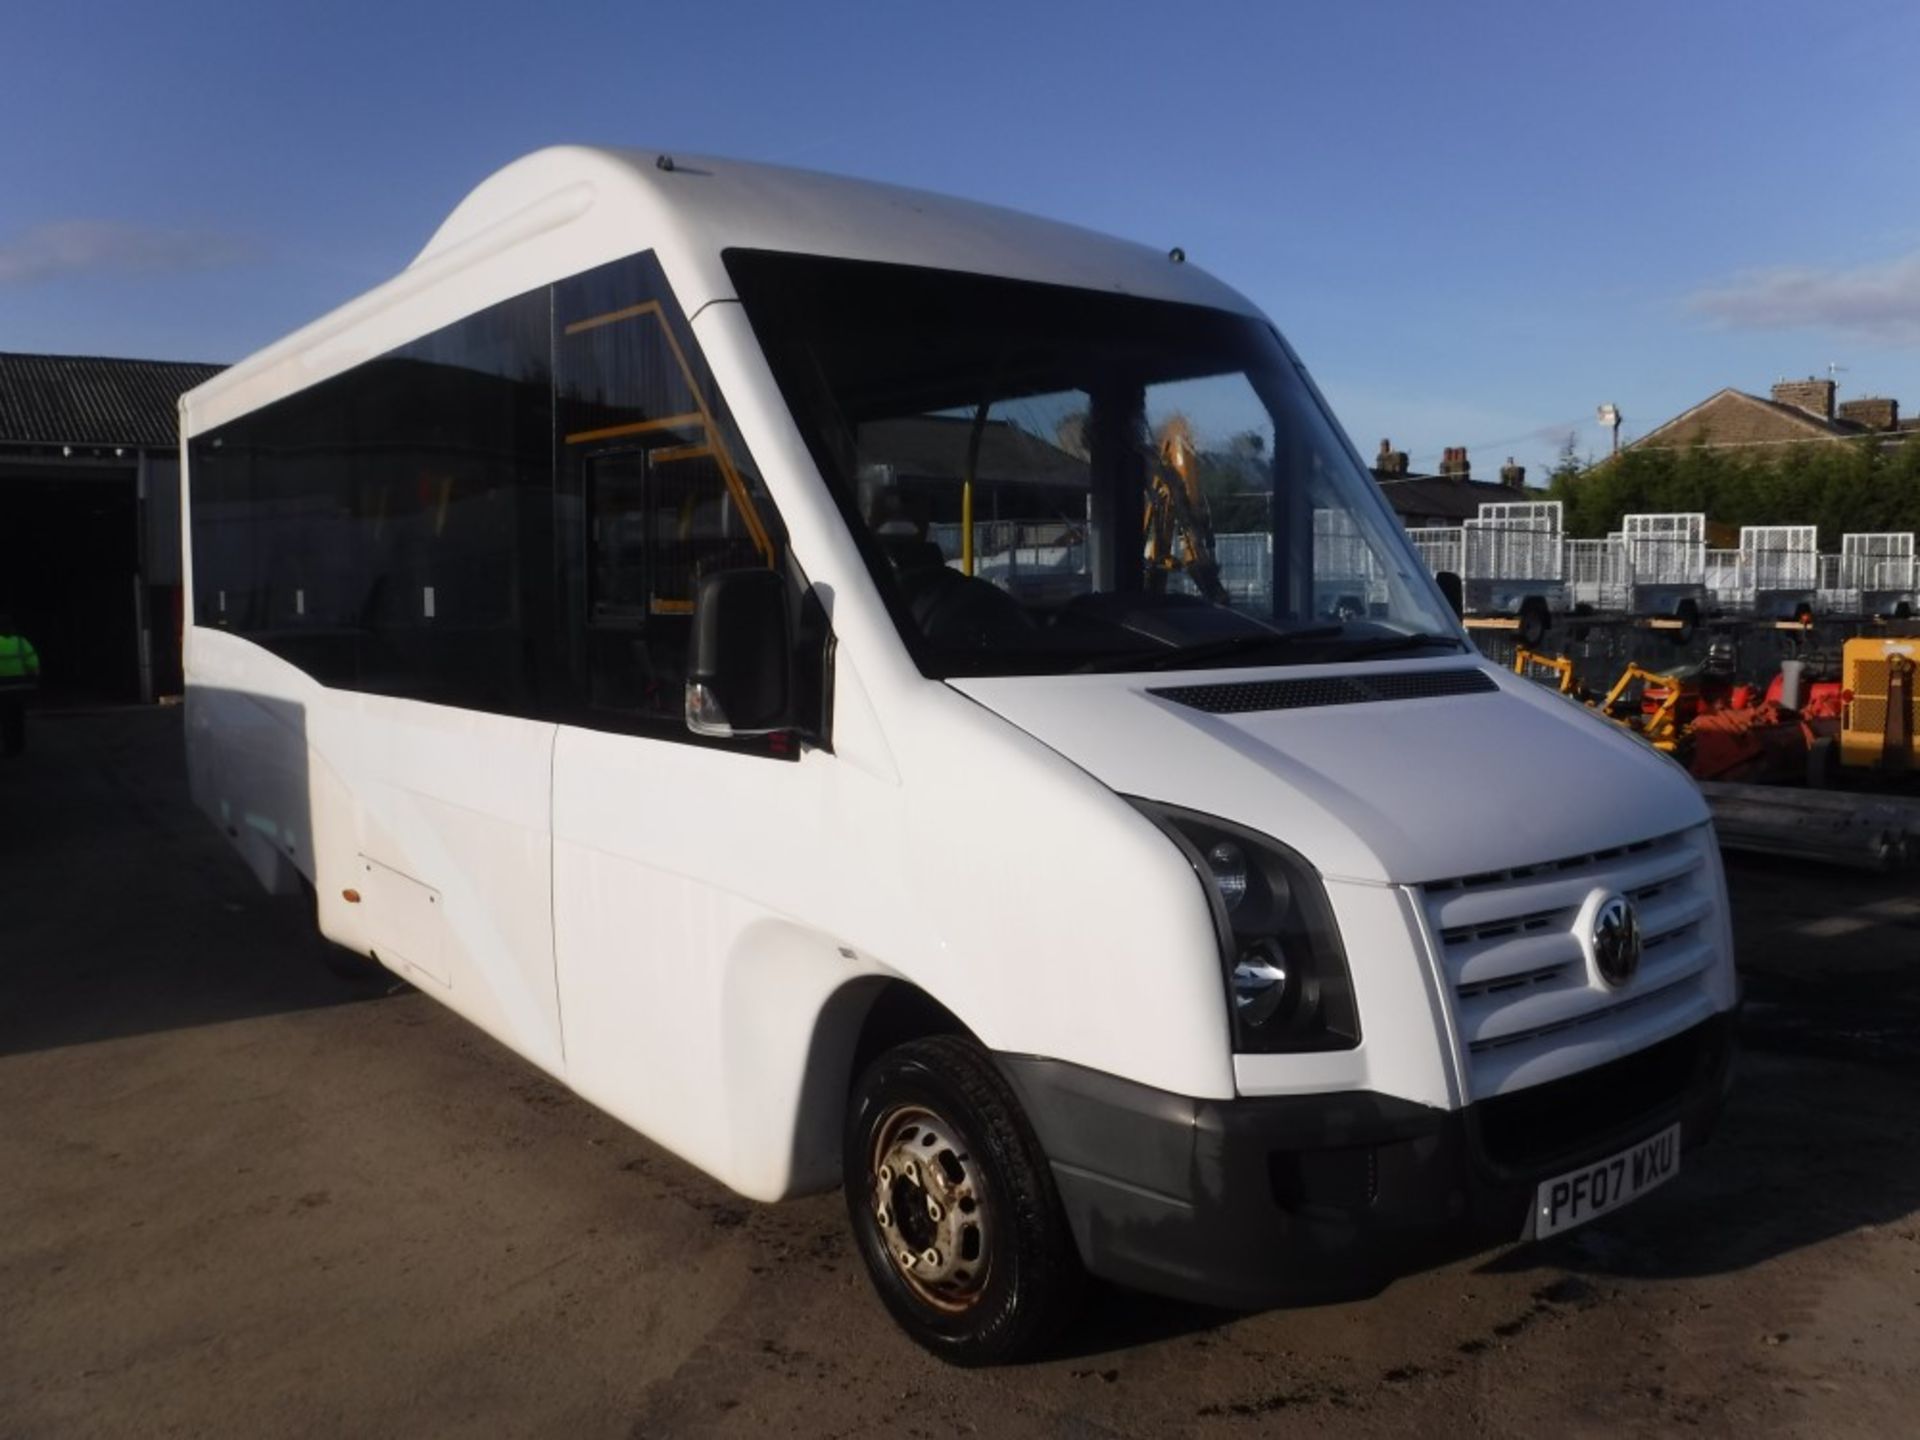 07 reg VW CRAFTER ACCESSIBLE MINIBUS, 1ST REG 08/07, TEST 08/17, 87602M NOT WARRANTED, V5 HERE, 1